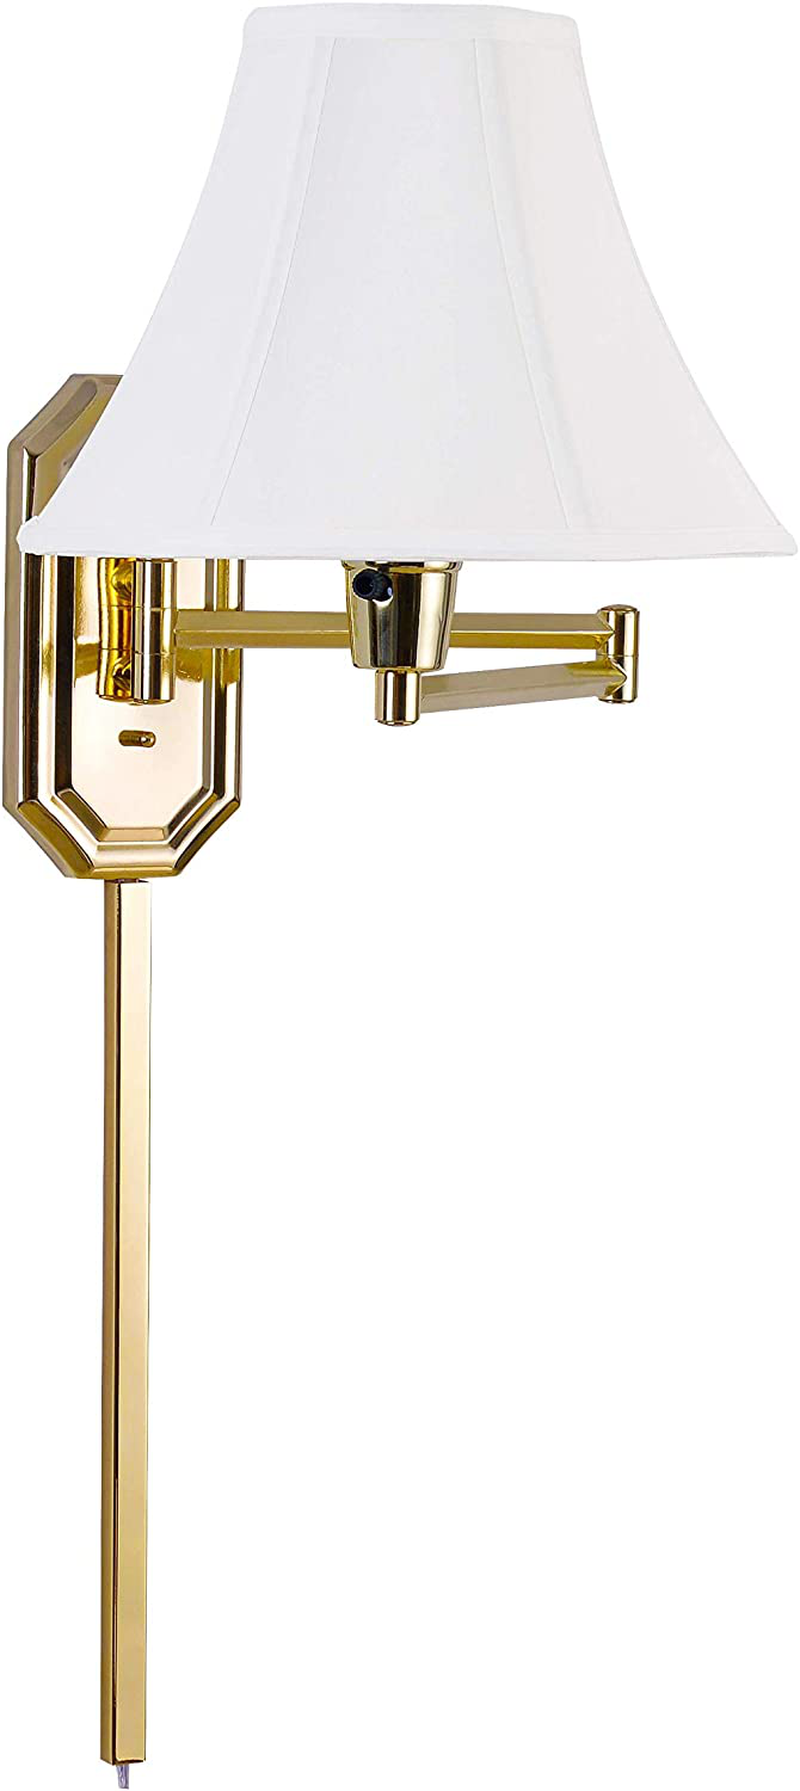 Kenroy Home 30130PB Nathaniel Wall Swing Arm Lamp, 15 Inch Height, 15 Inch Width, 24 Inch Extension, Polished Brass Home & Garden > Lighting > Lighting Fixtures > Wall Light Fixtures KOL DEALS   